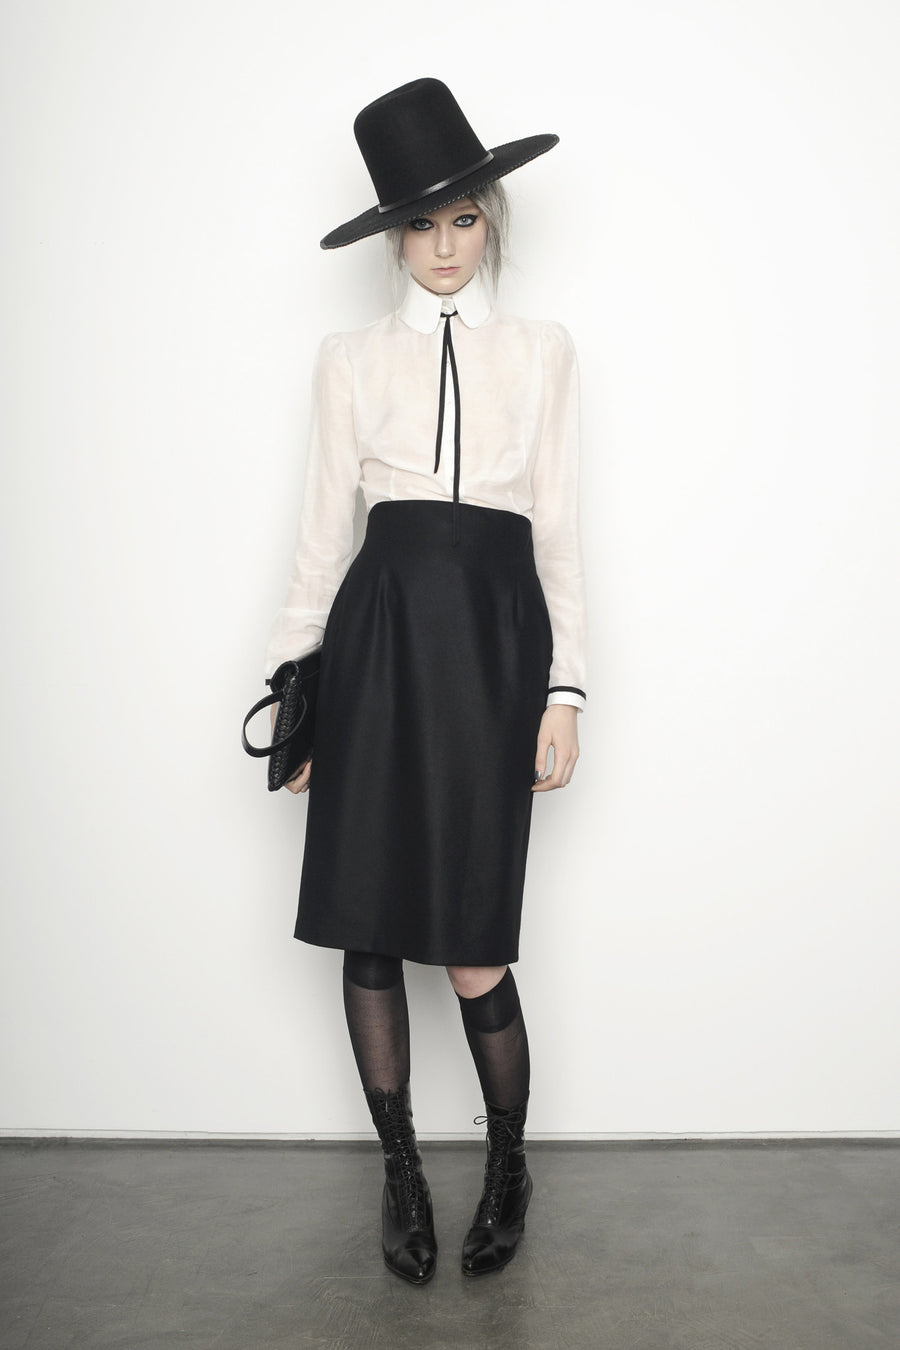 Juliette F IMG Model Wendy Nichol Clothing Fashion Designer Runway Show AW15 Queen of Thieves Peaky Blinders Witch Wide Brim Whipstitch Hat Silk cotton peter pan collar Blouse White Silk Cashmere Pencil Skirt Custom Tailoring Made to Measure Order Handmade in NYC